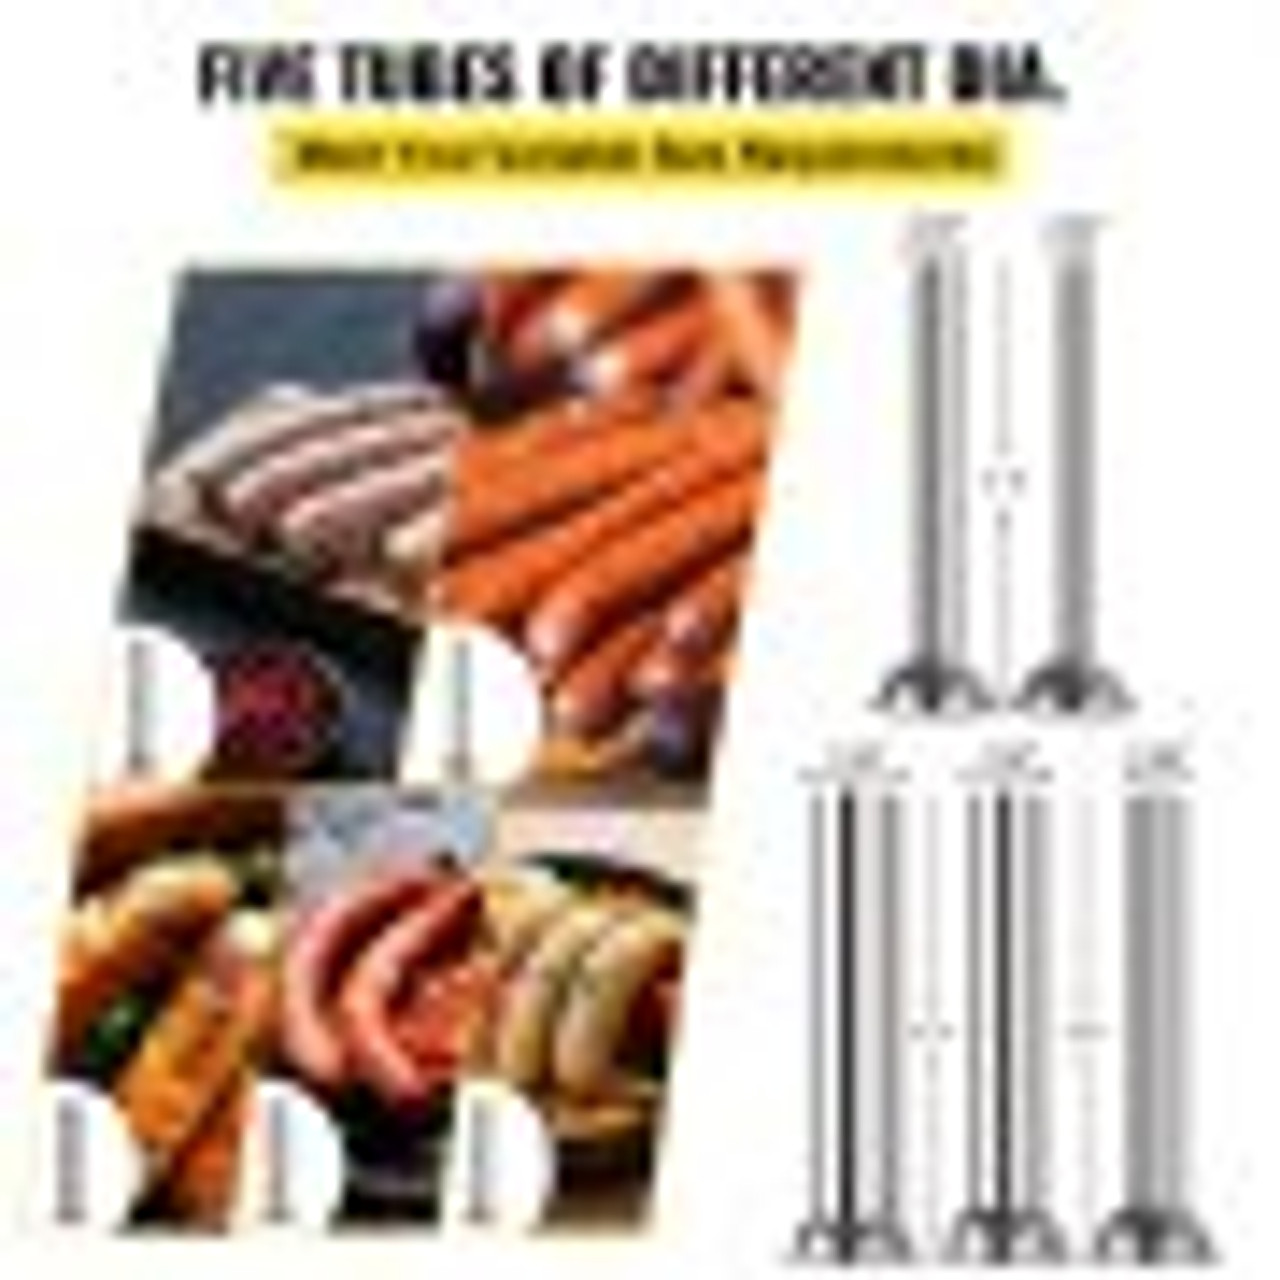 Electric Sausage Stuffer 20L Capacity, Vertical Meat Stuffer Variable Speed, Stainless Steel Sausage Filler Machine with 5 Filling Funnels for Home Restaurant Use